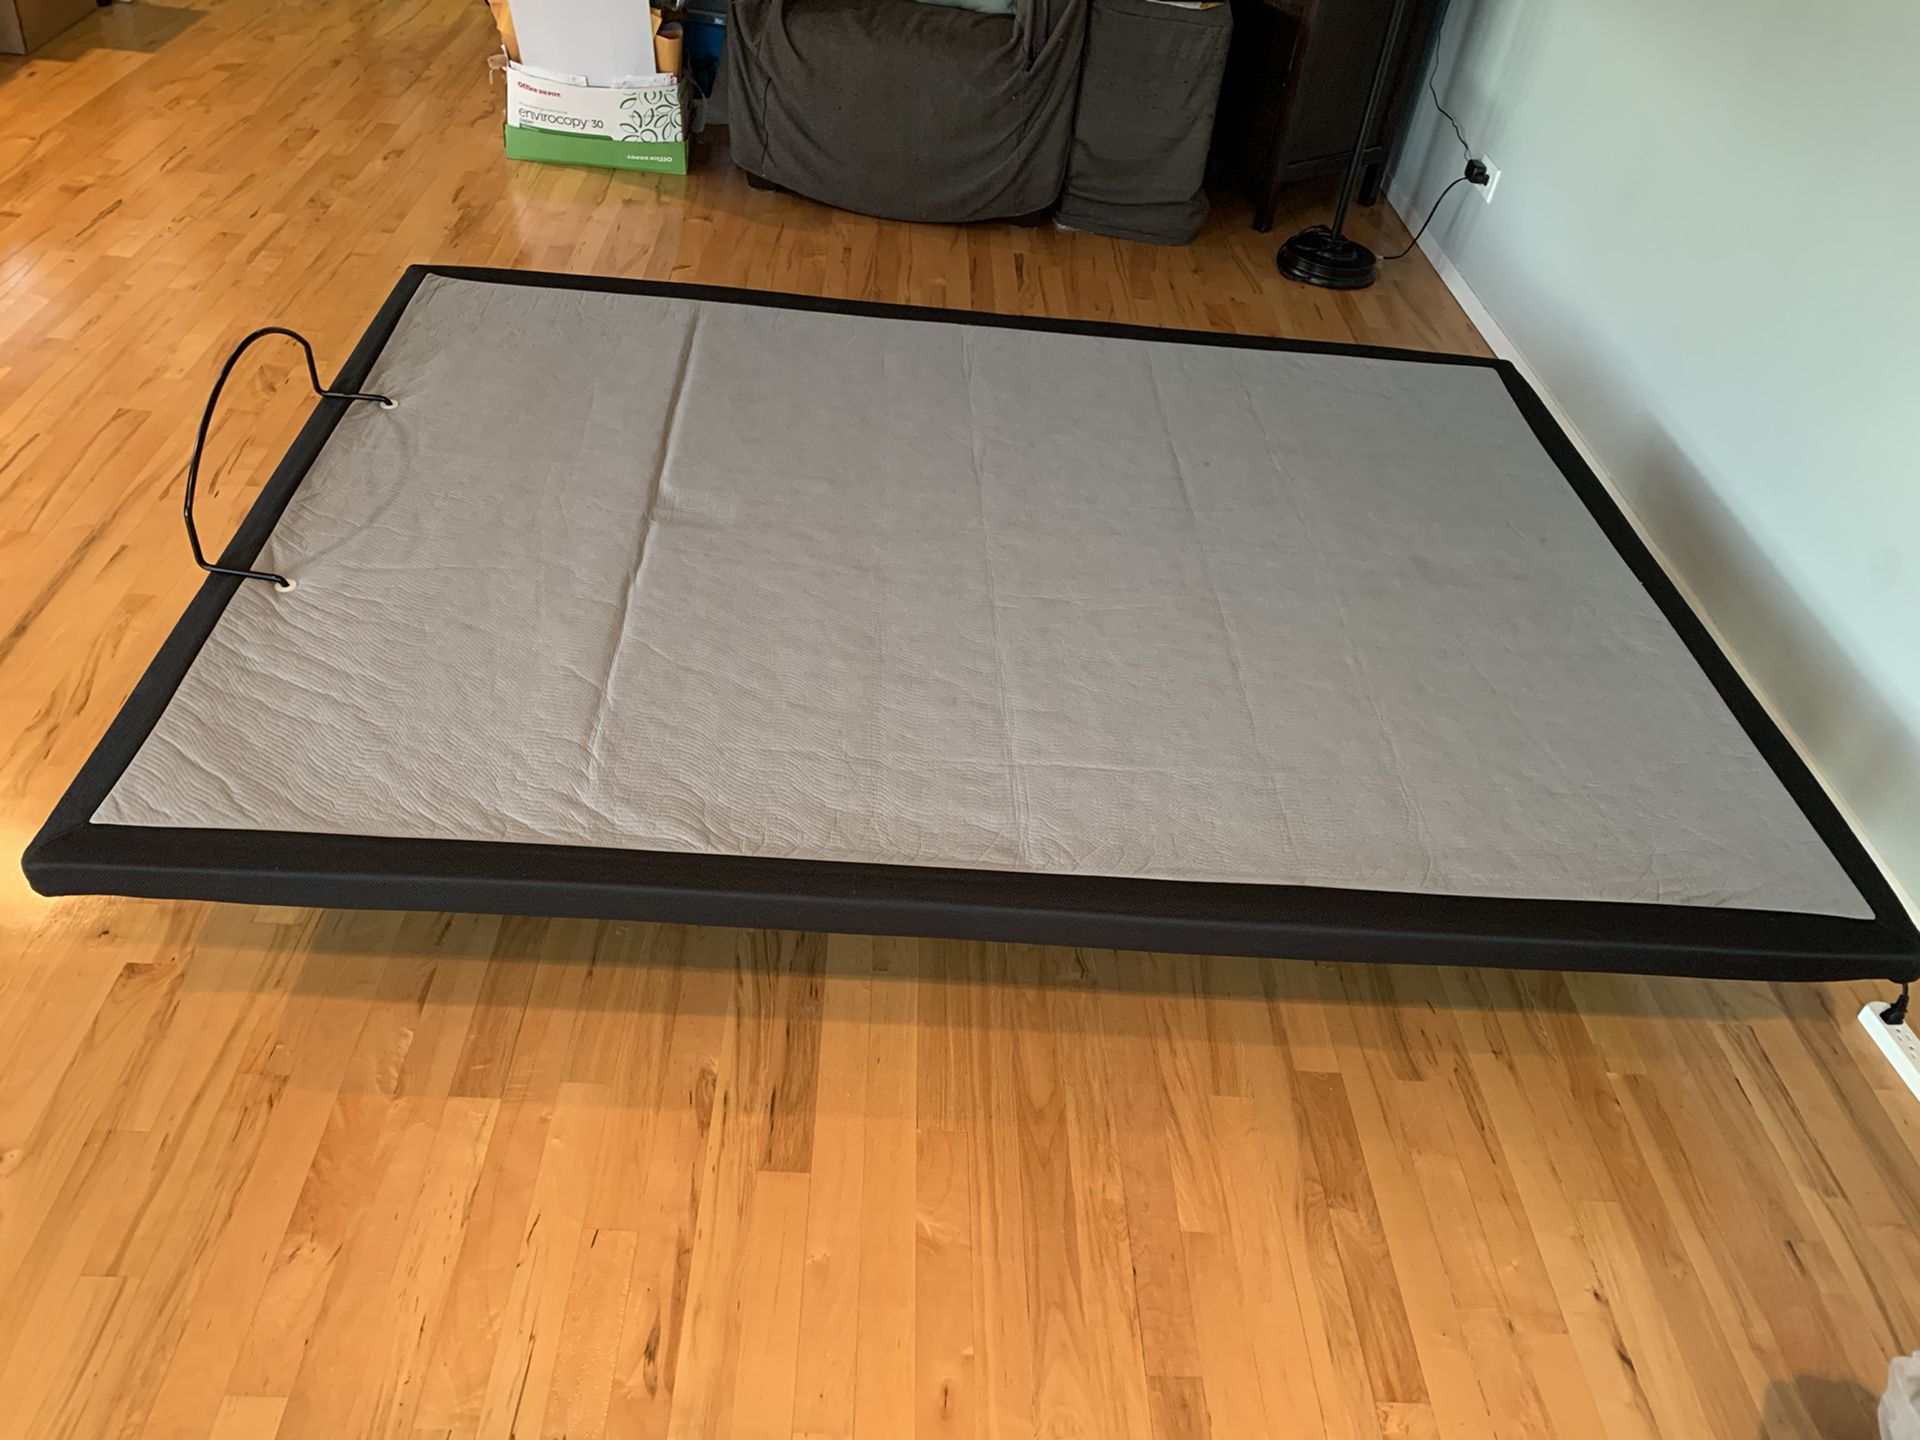 mattress firm 300 adjustable base stopped working